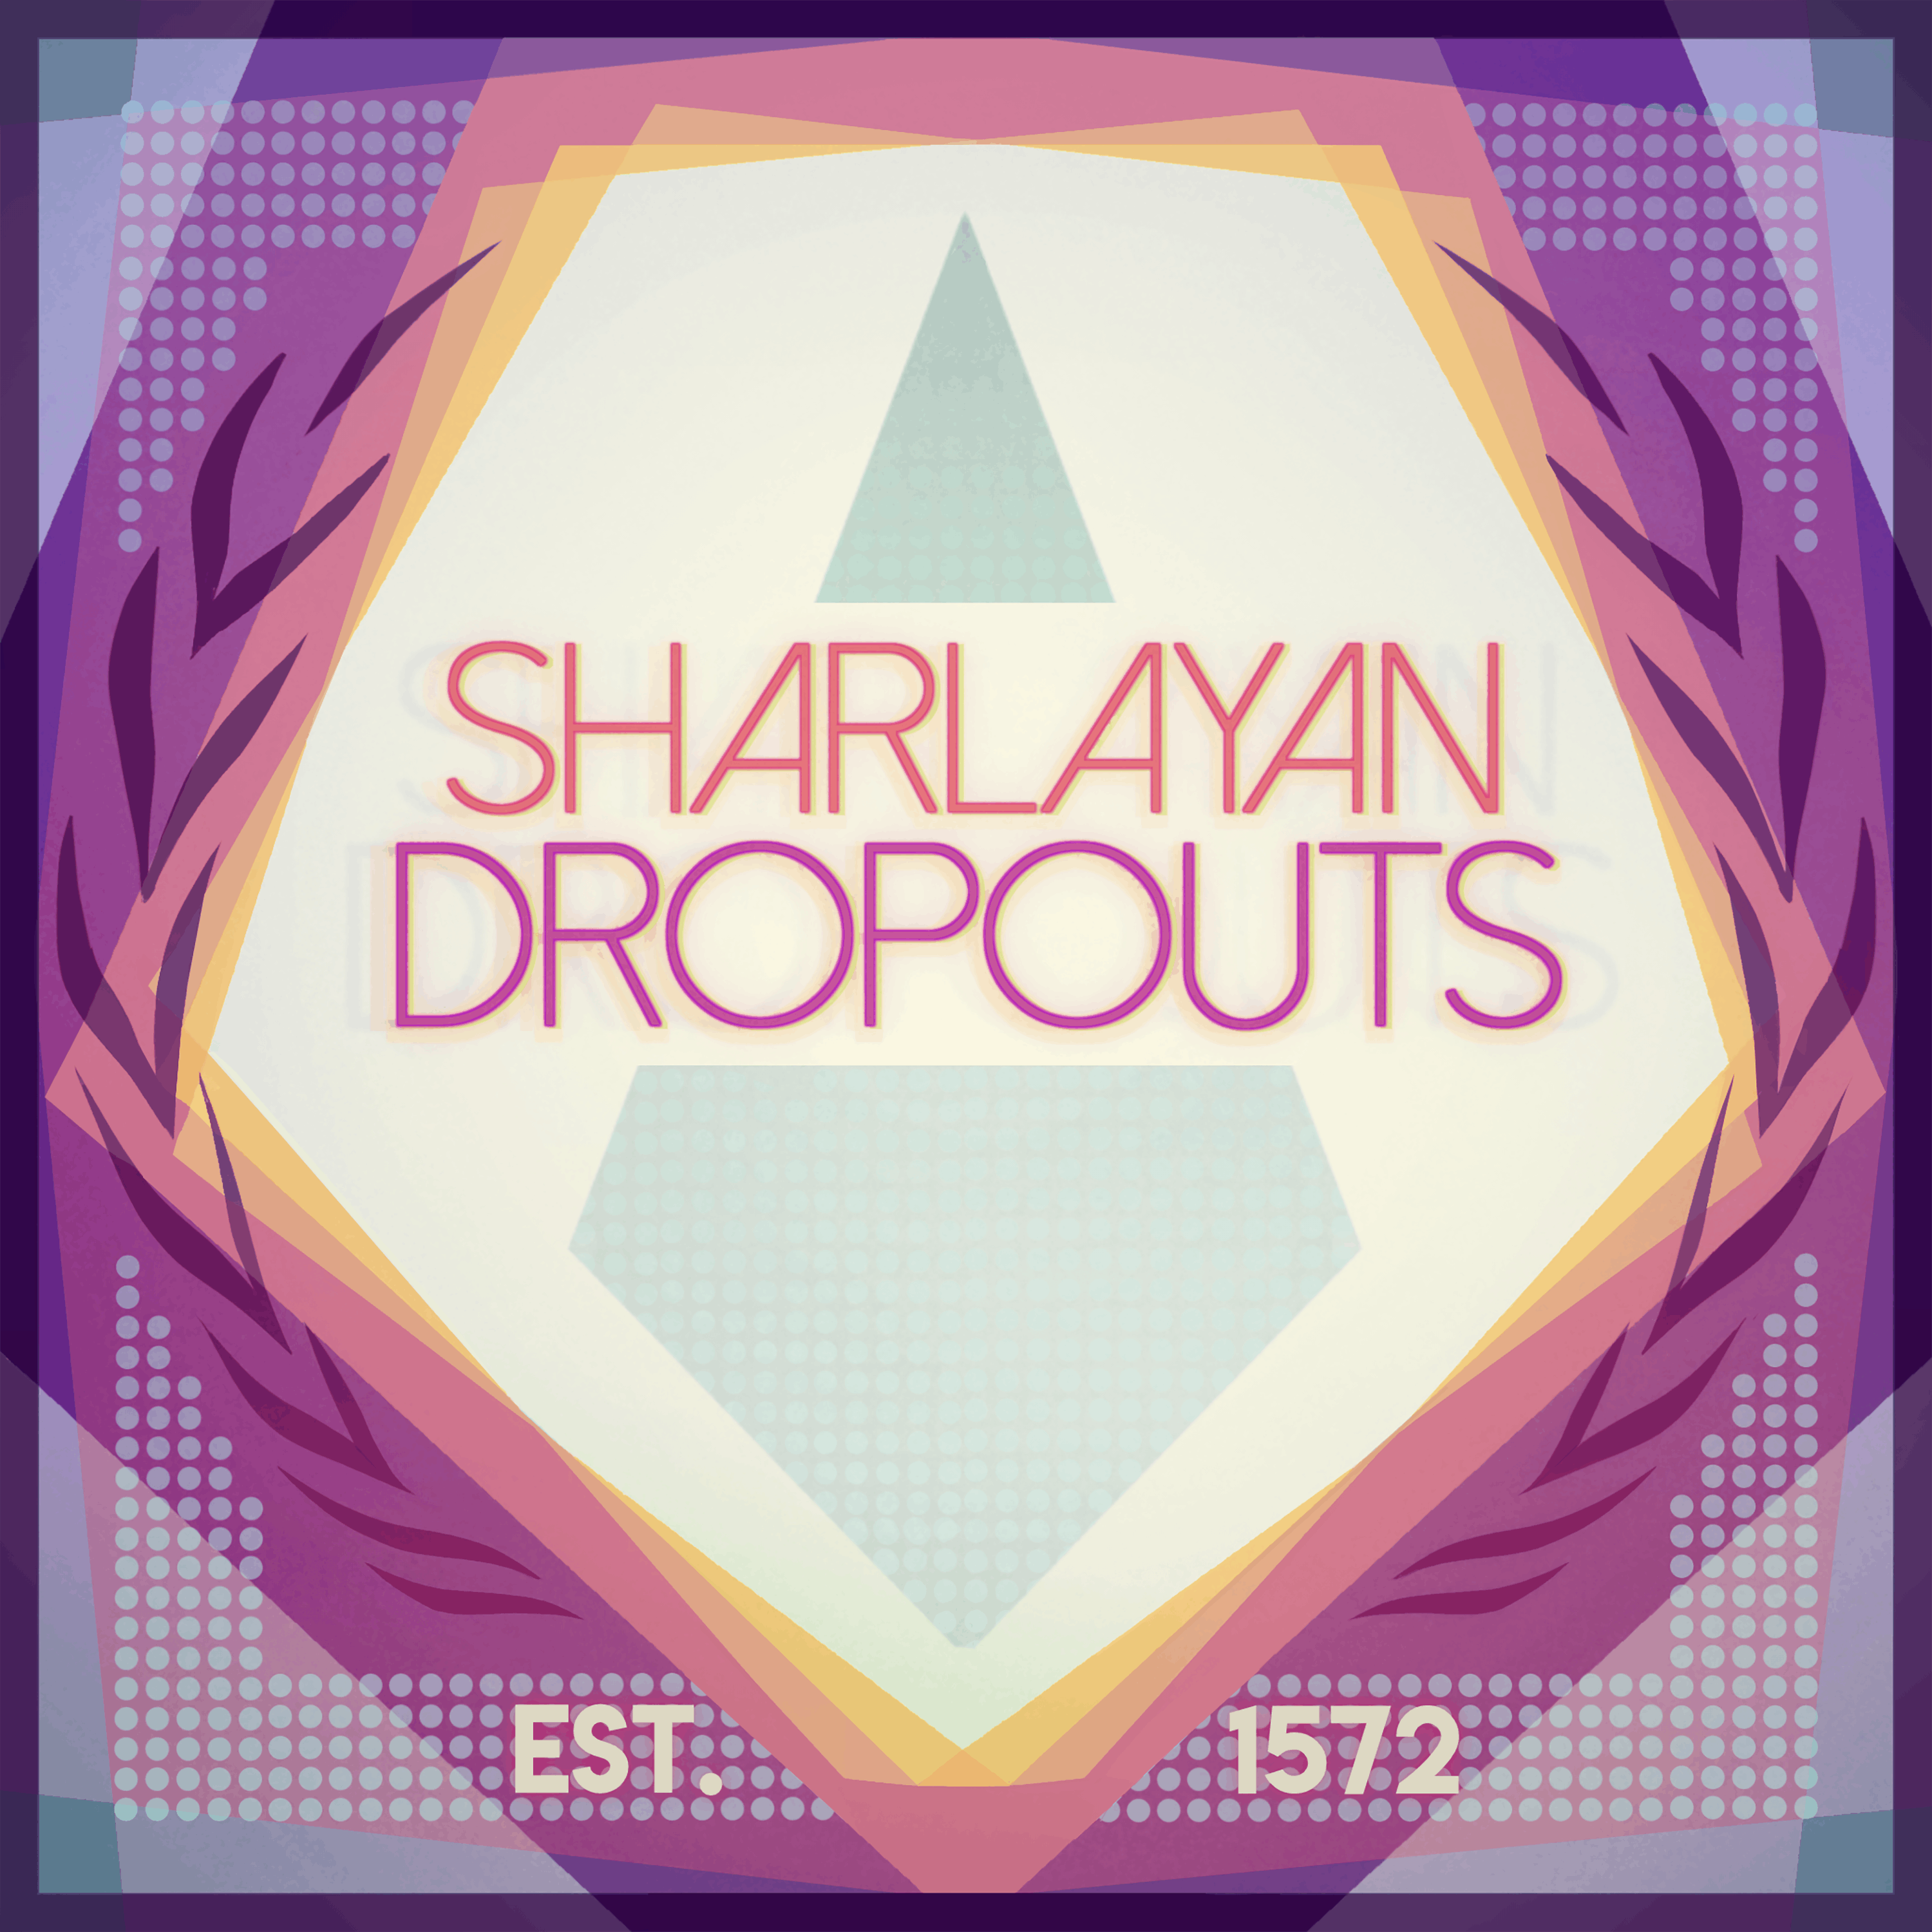 Sharlayan Dropouts Valentione’s Day Special: FFXIV’s Top 12 Simpable Hotties